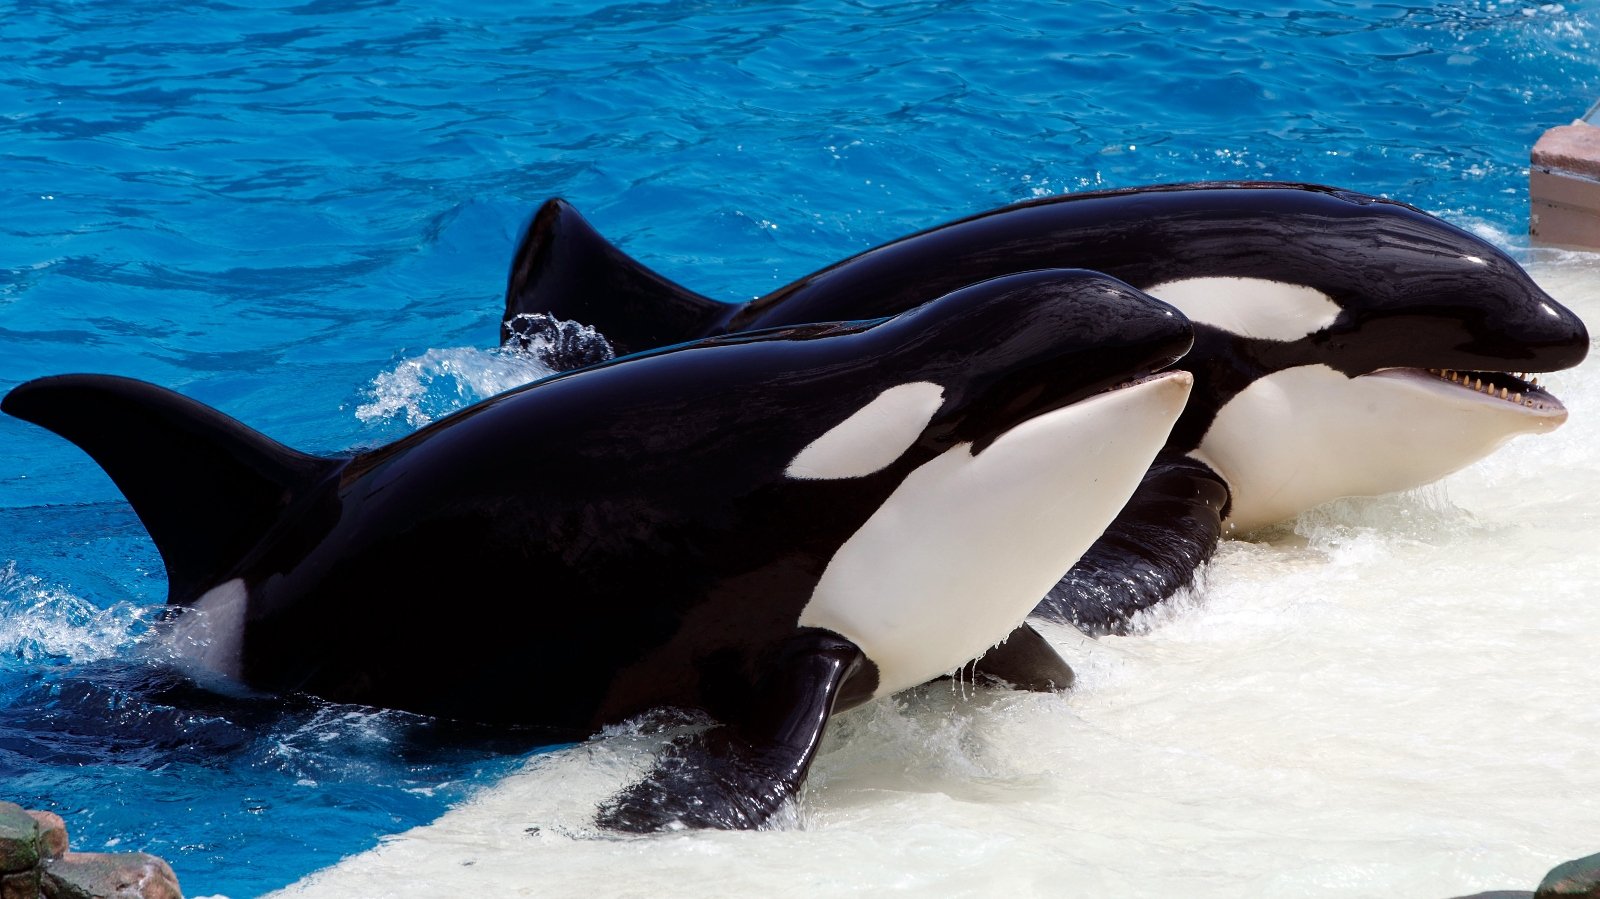 Criminal Charges Sought Against SeaWorld Following Recent Orca Fight